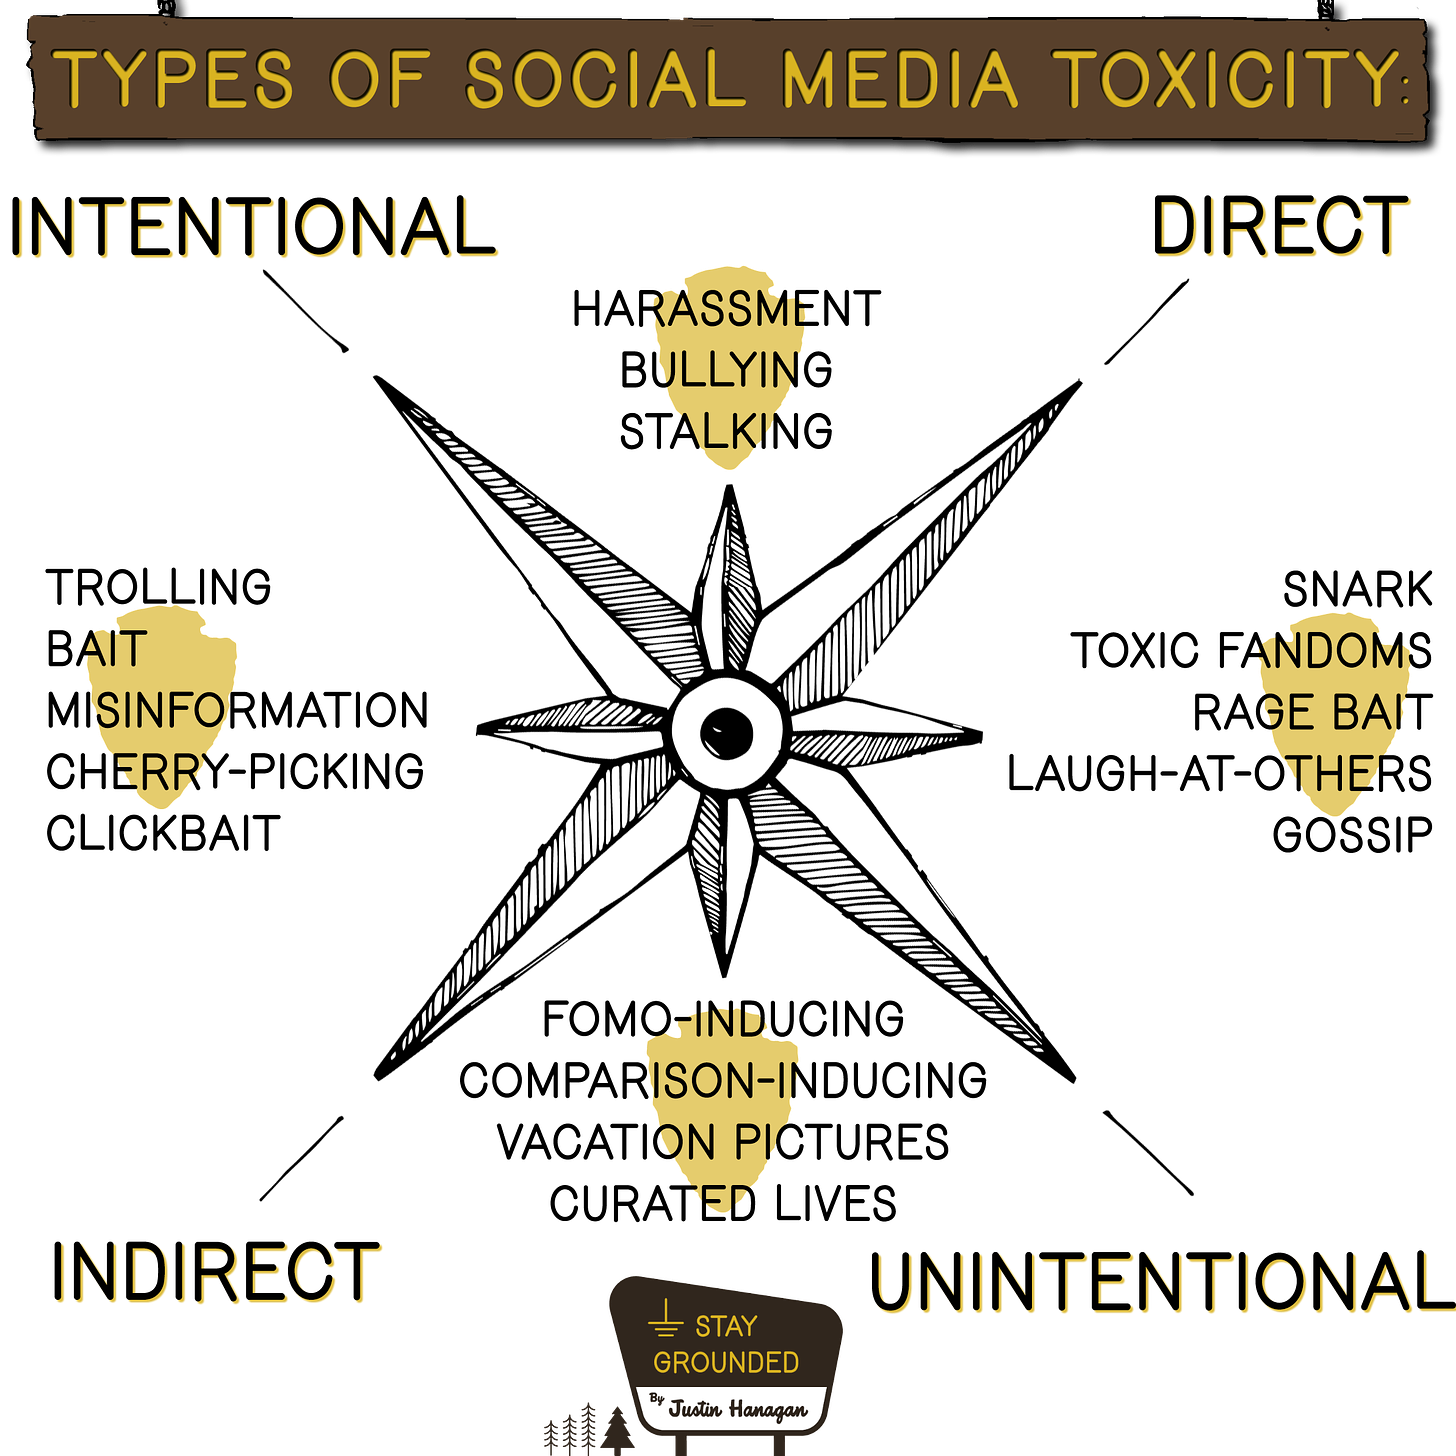 And image showing the four types of toxicity described below